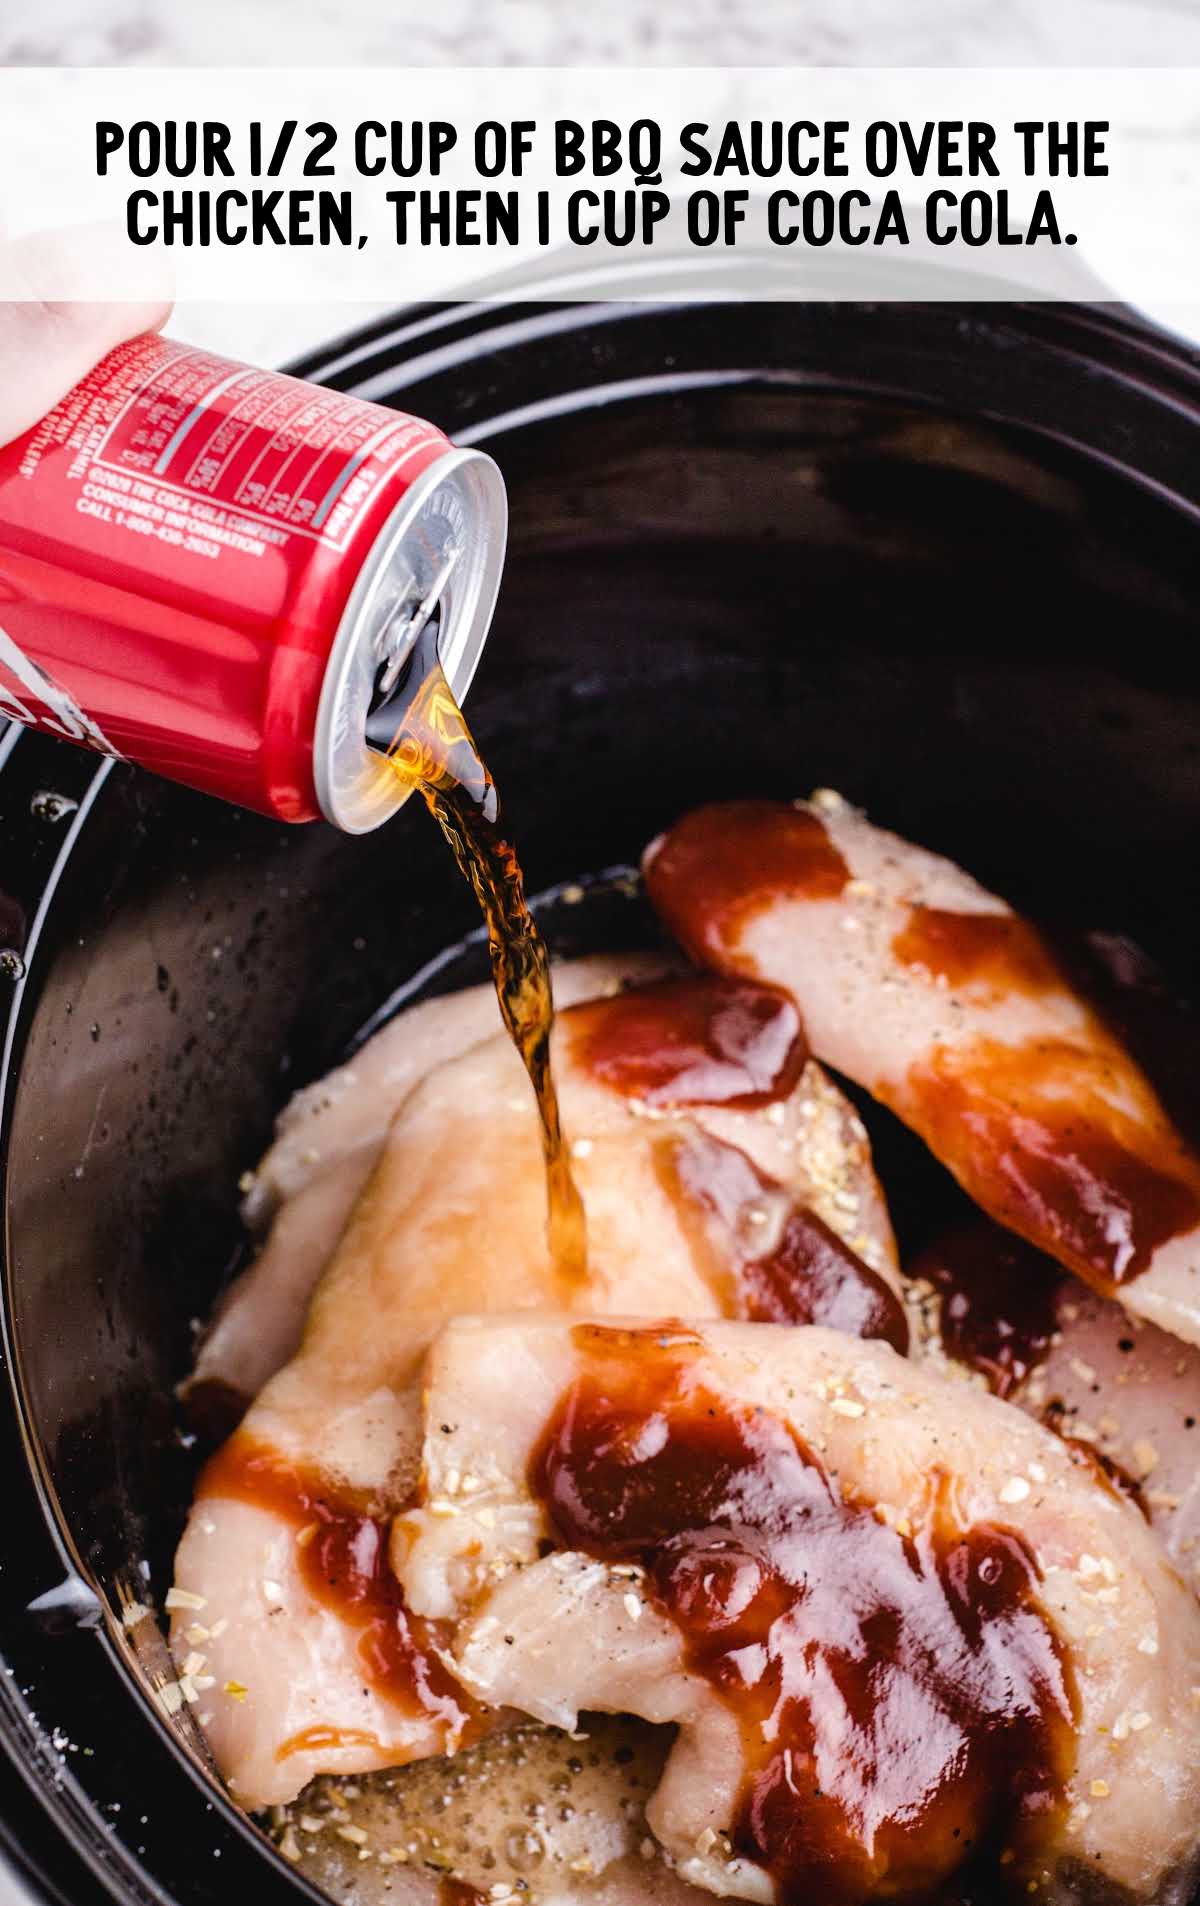 bbq sauce and coca-cola added to the chicken breast in the slow cooker